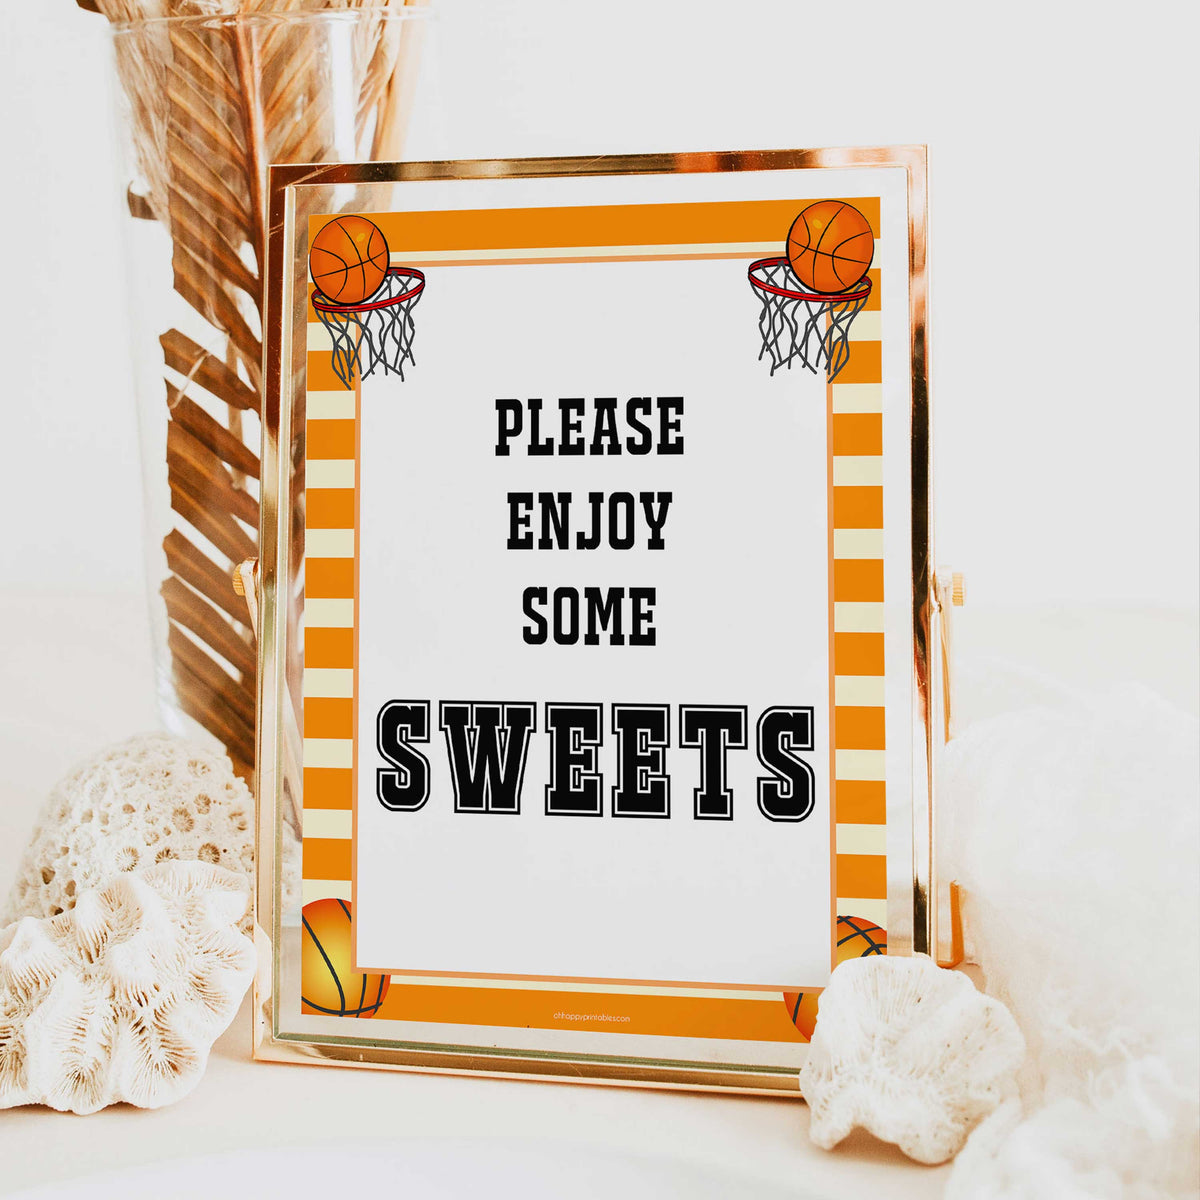 sweets baby table  sign, sweets baby sign, Basketball baby decor, printable baby table signs, printable baby decor, Basketball table signs, fun baby signs, Basketball fun baby table signs